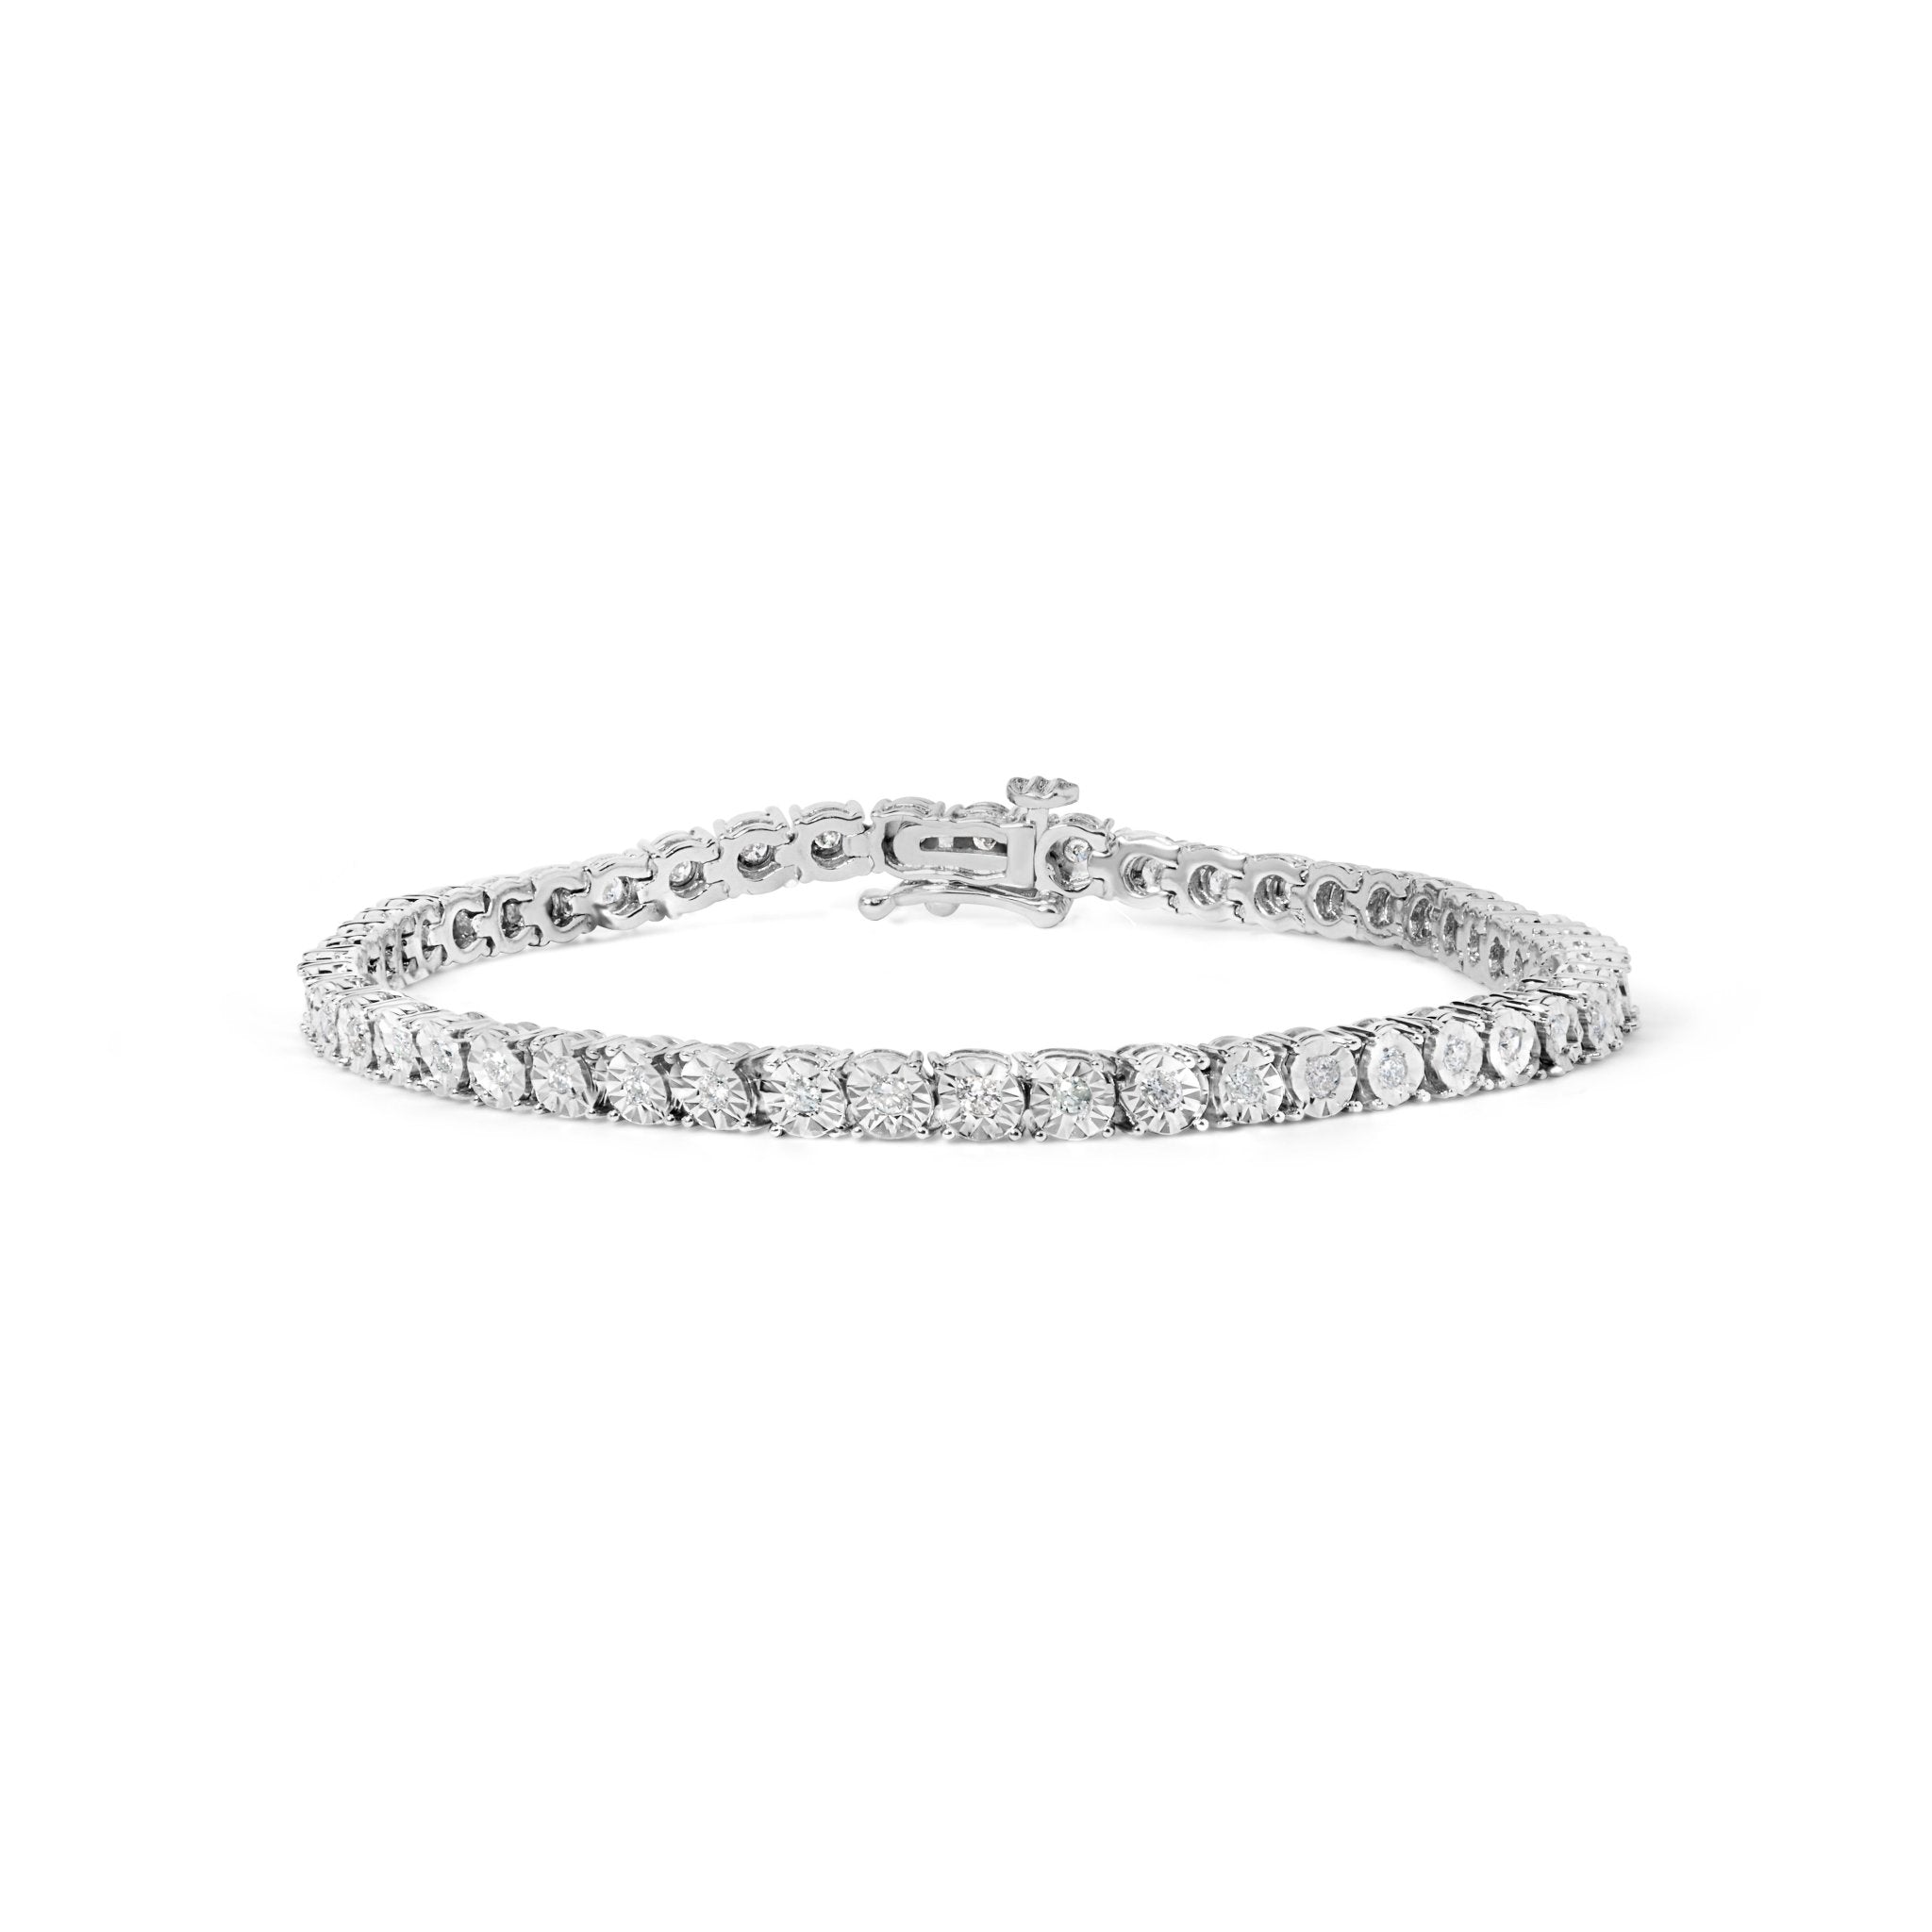 .925 Sterling Silver 1.0 Cttw Diamond Miracle Tennis Bracelet (I-J Color, I3 Clarity) - 7